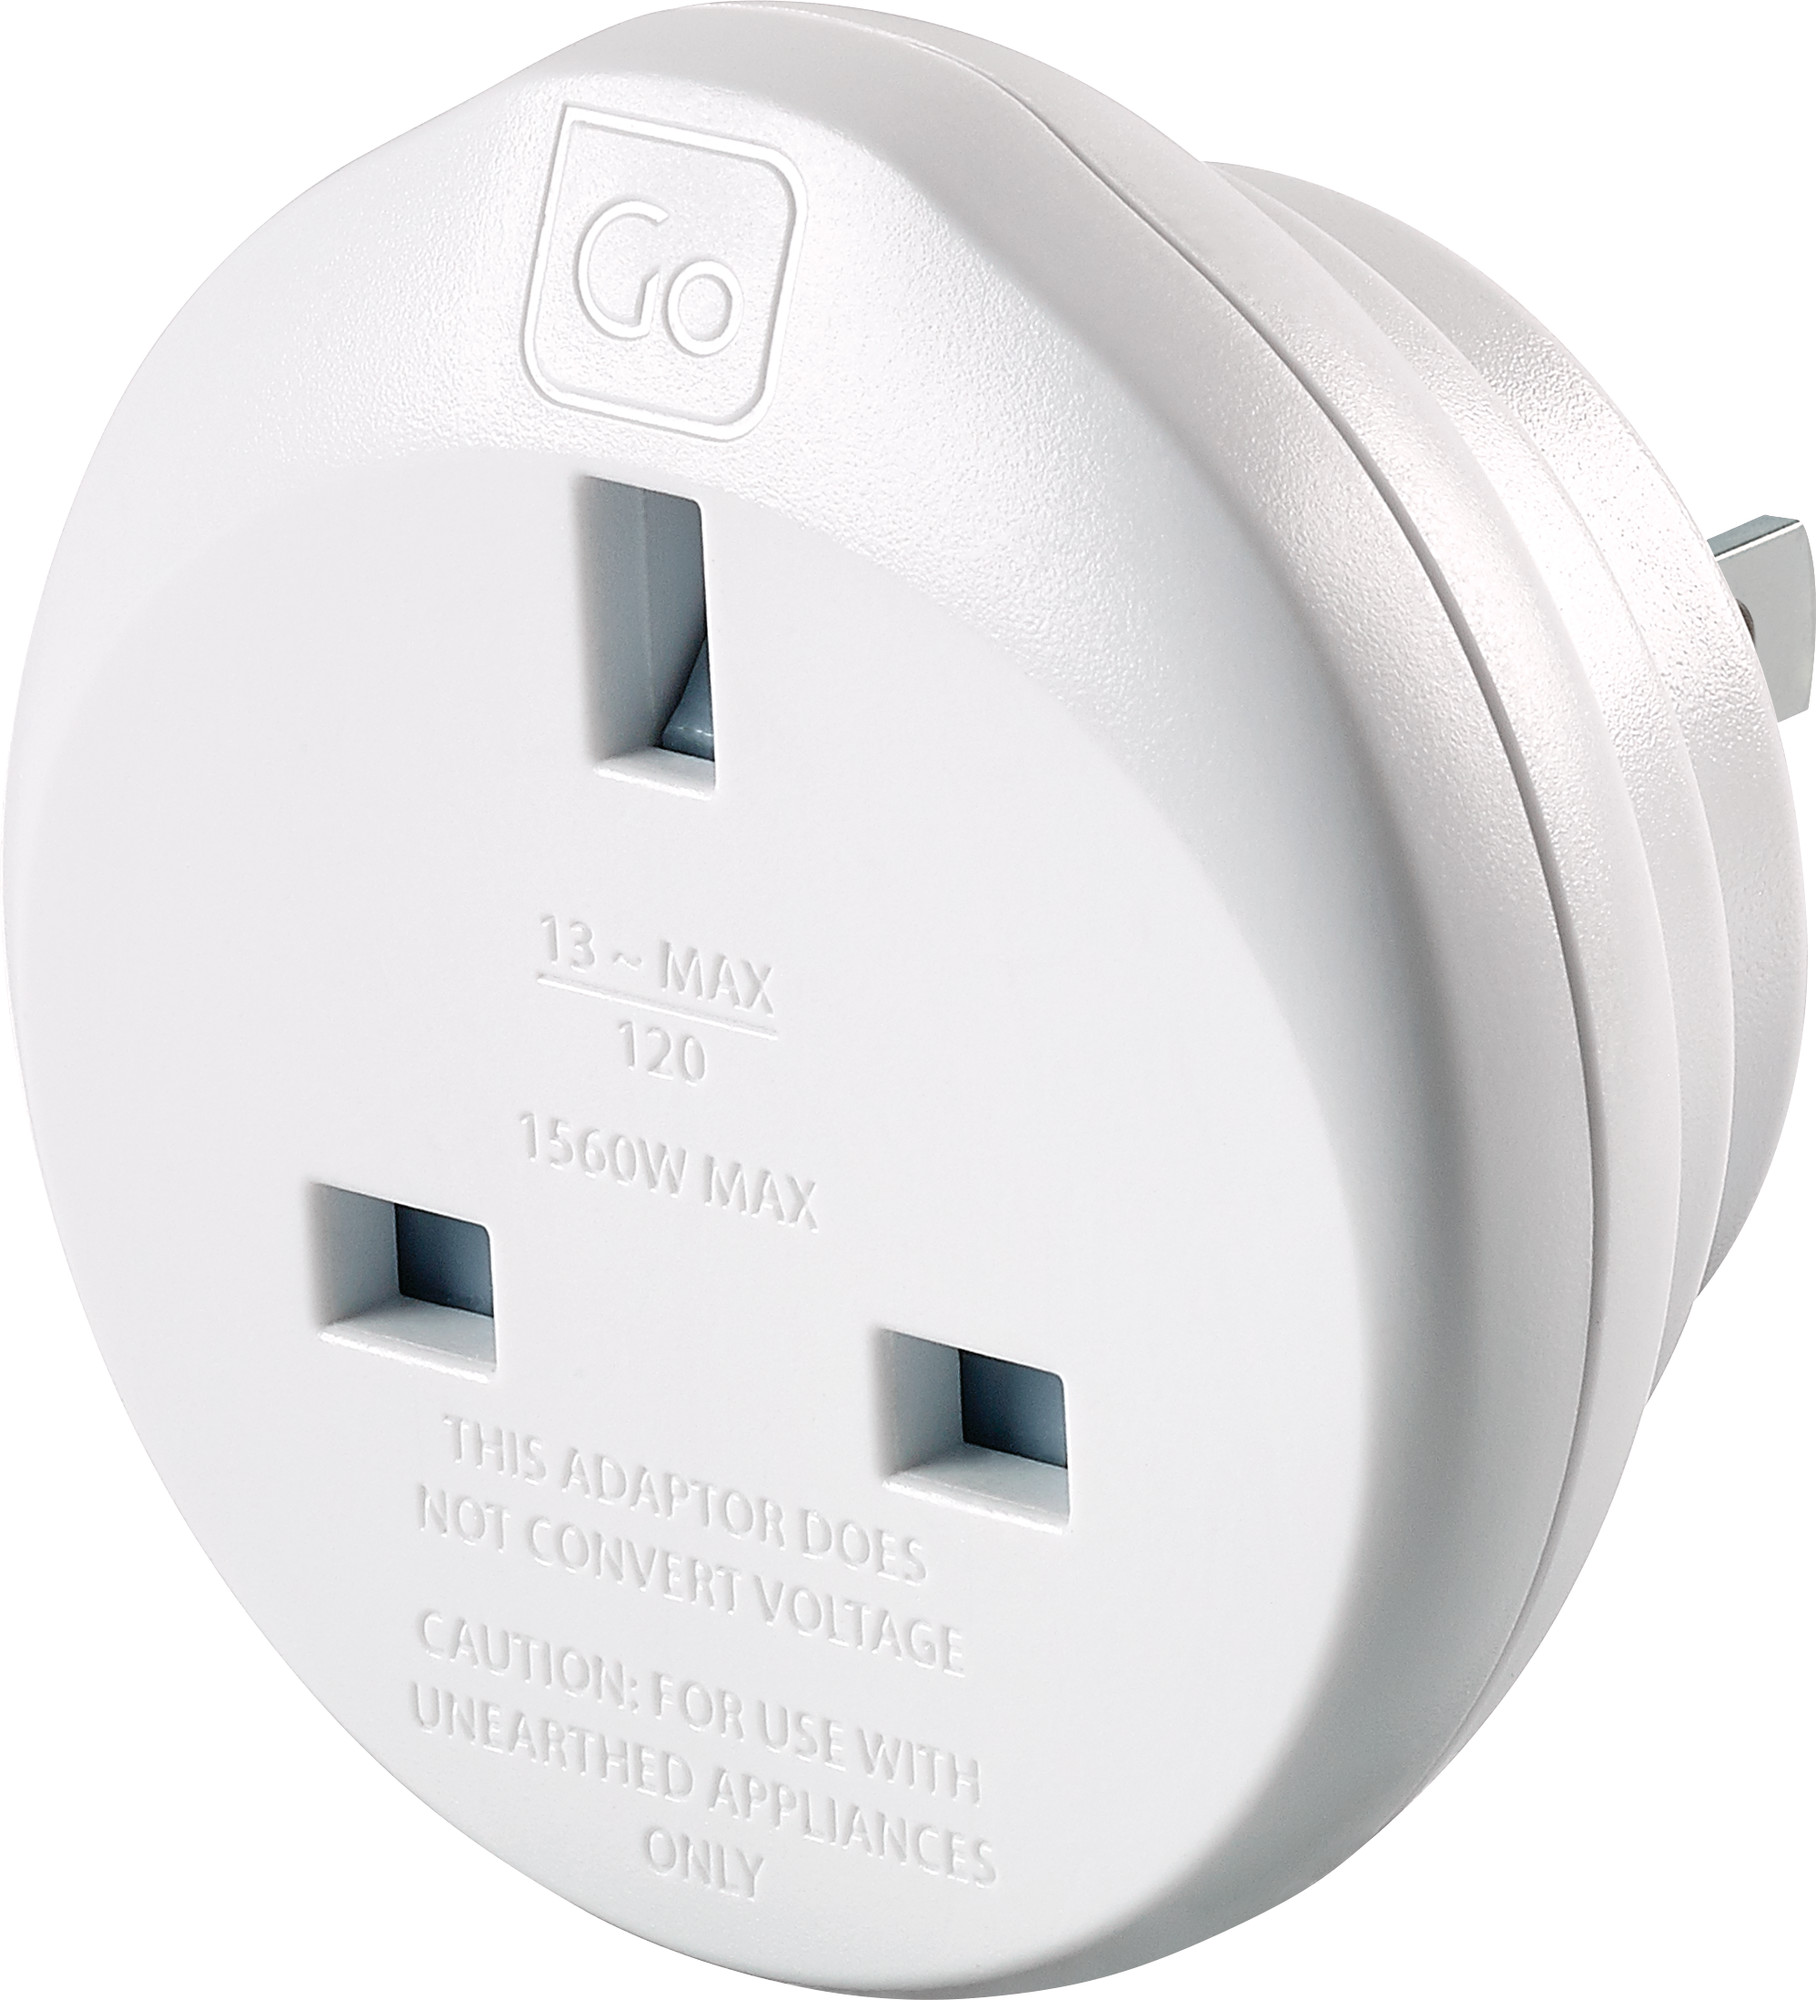 Picture of Go Travel UK Japan USA Adapter